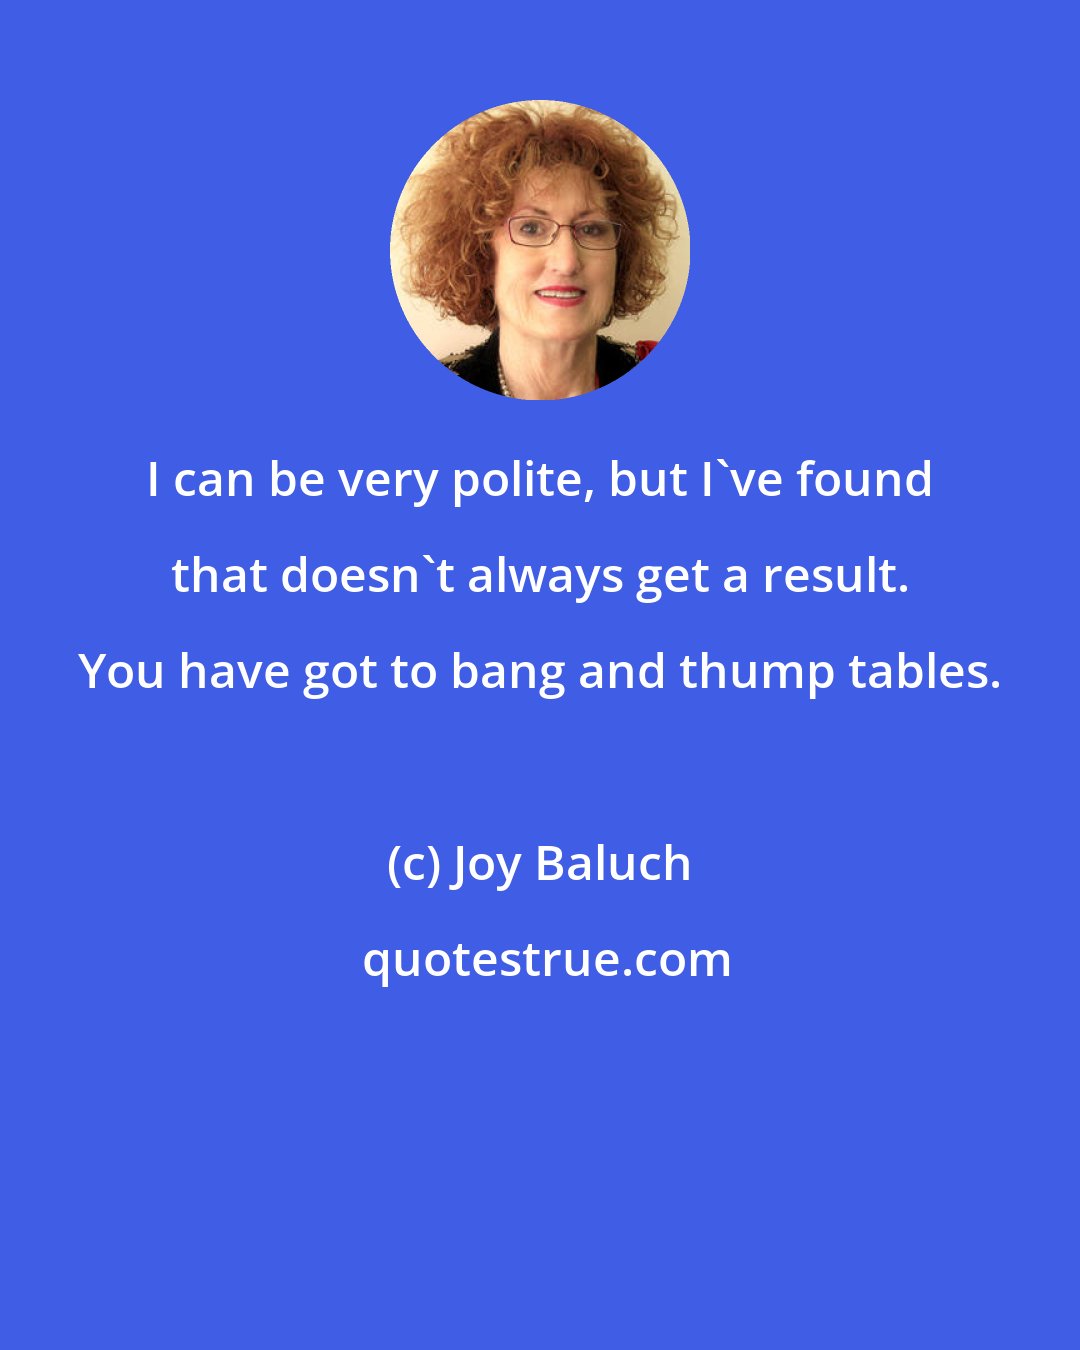 Joy Baluch: I can be very polite, but I've found that doesn't always get a result. You have got to bang and thump tables.